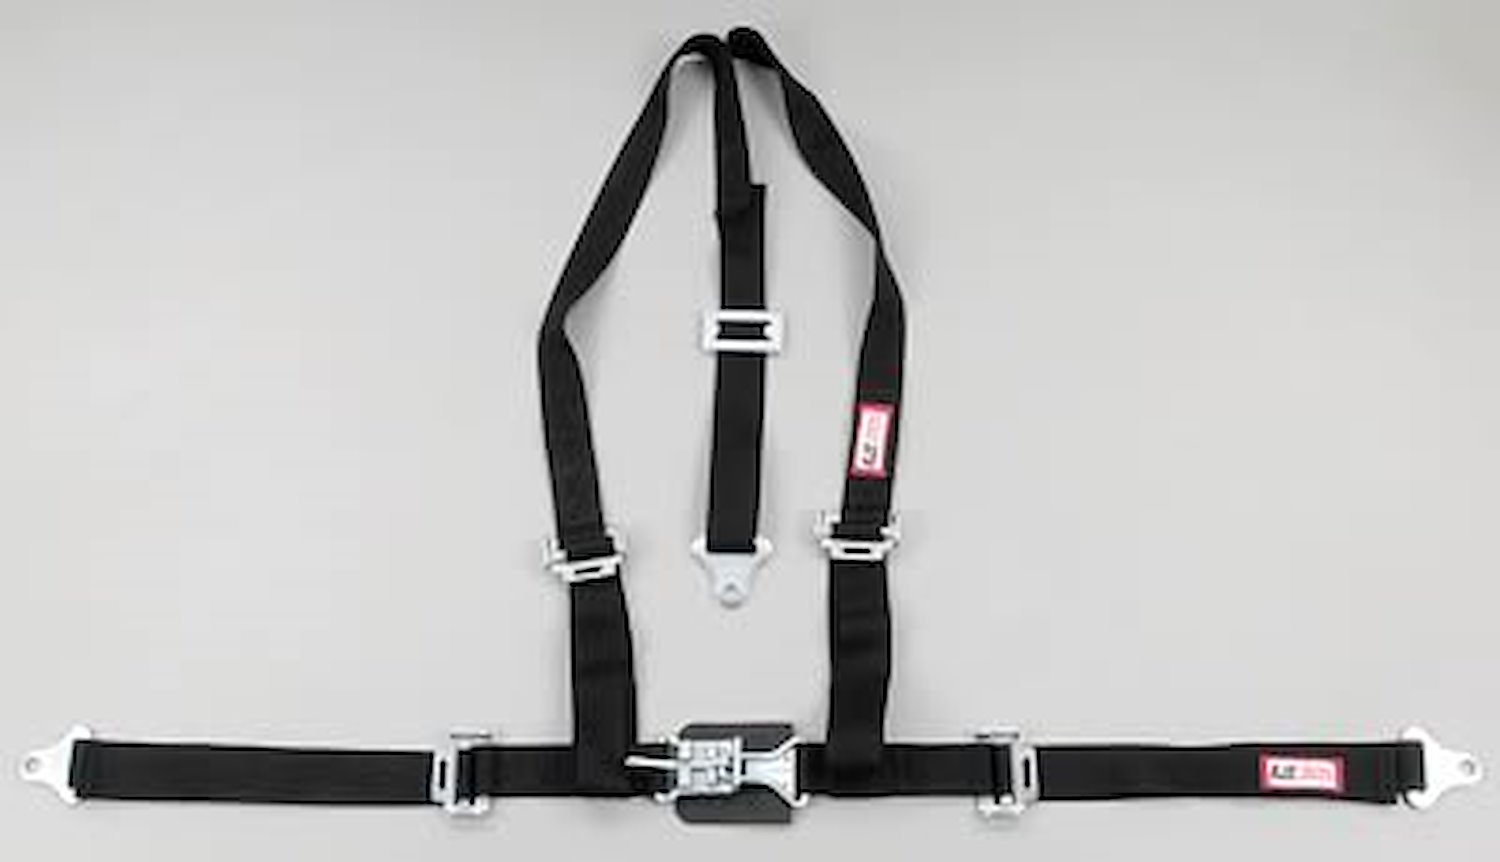 NON-SFI L&L HARNESS 3 PULL DOWN Lap Belt SEWN IN 2 S.H. Individual FLOOR Mount ALL WRAP ENDS BLUE